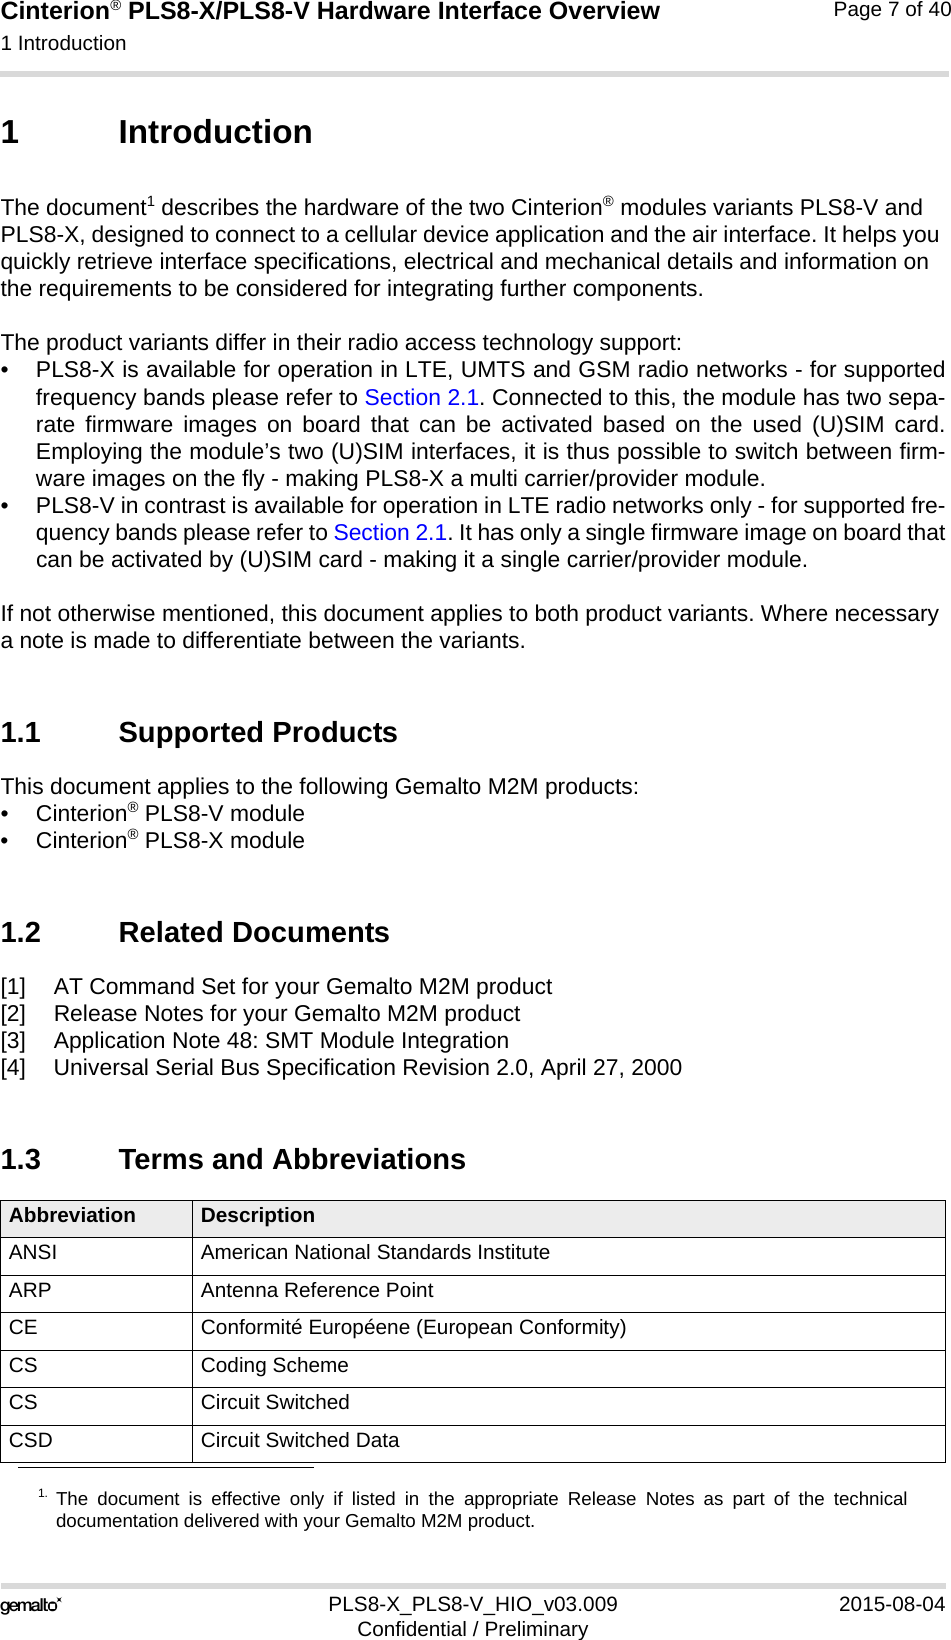 Cinterion® PLS8-X/PLS8-V Hardware Interface Overview1 Introduction13PLS8-X_PLS8-V_HIO_v03.009 2015-08-04Confidential / PreliminaryPage 7 of 401 IntroductionThe document1 describes the hardware of the two Cinterion® modules variants PLS8-V and PLS8-X, designed to connect to a cellular device application and the air interface. It helps you quickly retrieve interface specifications, electrical and mechanical details and information on the requirements to be considered for integrating further components.The product variants differ in their radio access technology support: • PLS8-X is available for operation in LTE, UMTS and GSM radio networks - for supportedfrequency bands please refer to Section 2.1. Connected to this, the module has two sepa-rate firmware images on board that can be activated based on the used (U)SIM card.Employing the module’s two (U)SIM interfaces, it is thus possible to switch between firm-ware images on the fly - making PLS8-X a multi carrier/provider module.• PLS8-V in contrast is available for operation in LTE radio networks only - for supported fre-quency bands please refer to Section 2.1. It has only a single firmware image on board thatcan be activated by (U)SIM card - making it a single carrier/provider module. If not otherwise mentioned, this document applies to both product variants. Where necessary a note is made to differentiate between the variants.1.1 Supported ProductsThis document applies to the following Gemalto M2M products:•Cinterion® PLS8-V module•Cinterion® PLS8-X module1.2 Related Documents[1] AT Command Set for your Gemalto M2M product[2] Release Notes for your Gemalto M2M product[3] Application Note 48: SMT Module Integration[4] Universal Serial Bus Specification Revision 2.0, April 27, 20001.3 Terms and Abbreviations1. The document is effective only if listed in the appropriate Release Notes as part of the technicaldocumentation delivered with your Gemalto M2M product.Abbreviation DescriptionANSI American National Standards InstituteARP Antenna Reference PointCE Conformité Européene (European Conformity)CS Coding SchemeCS Circuit SwitchedCSD Circuit Switched Data